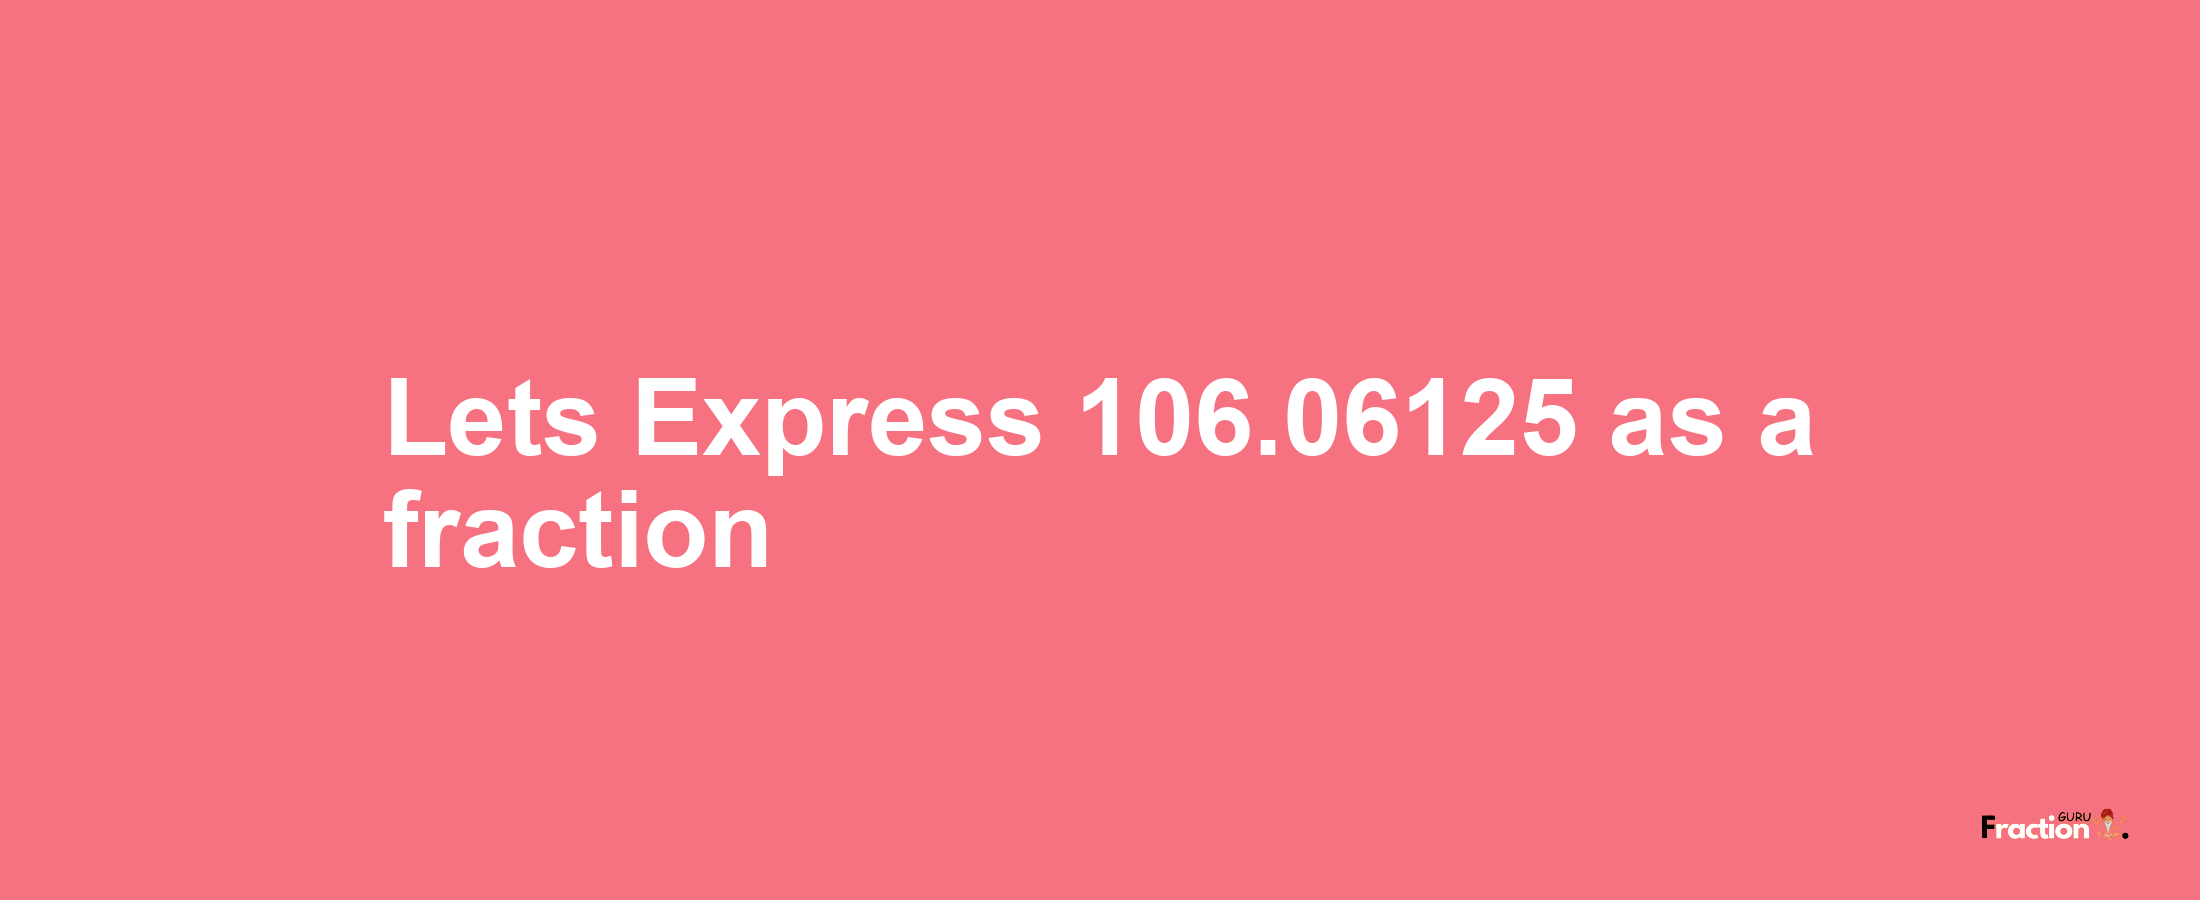 Lets Express 106.06125 as afraction